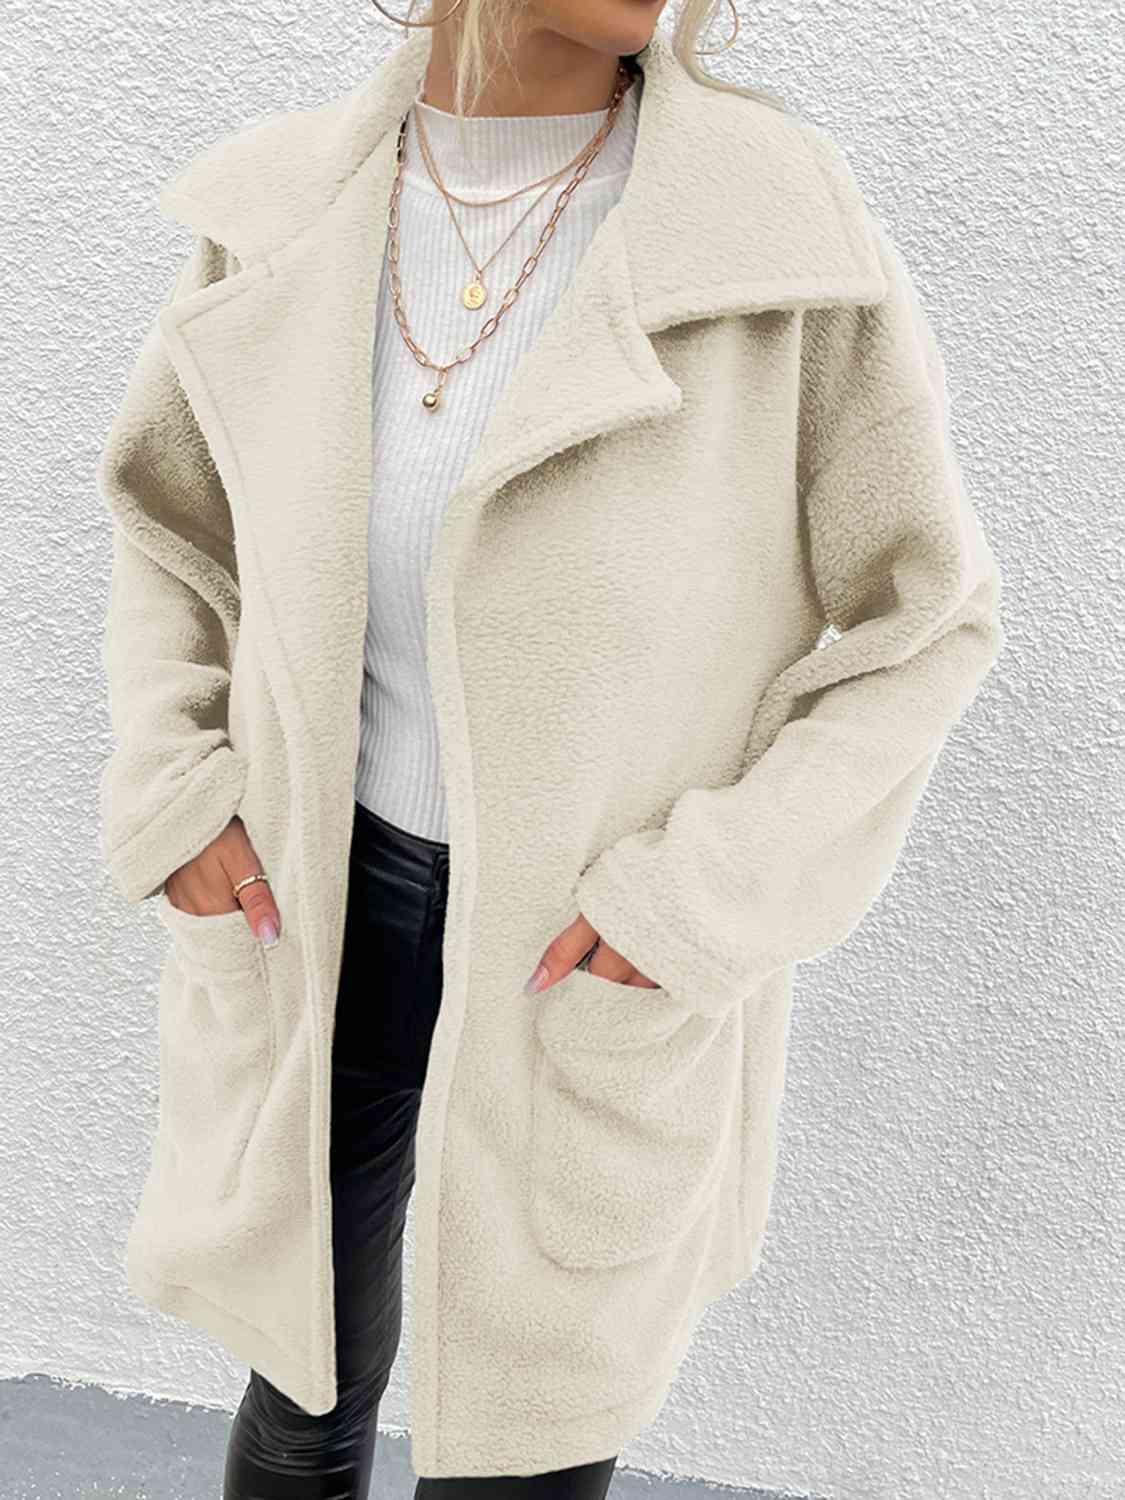 Light Gray Dropped Shoulder Coat with Pockets Sentient Beauty Fashions jackets